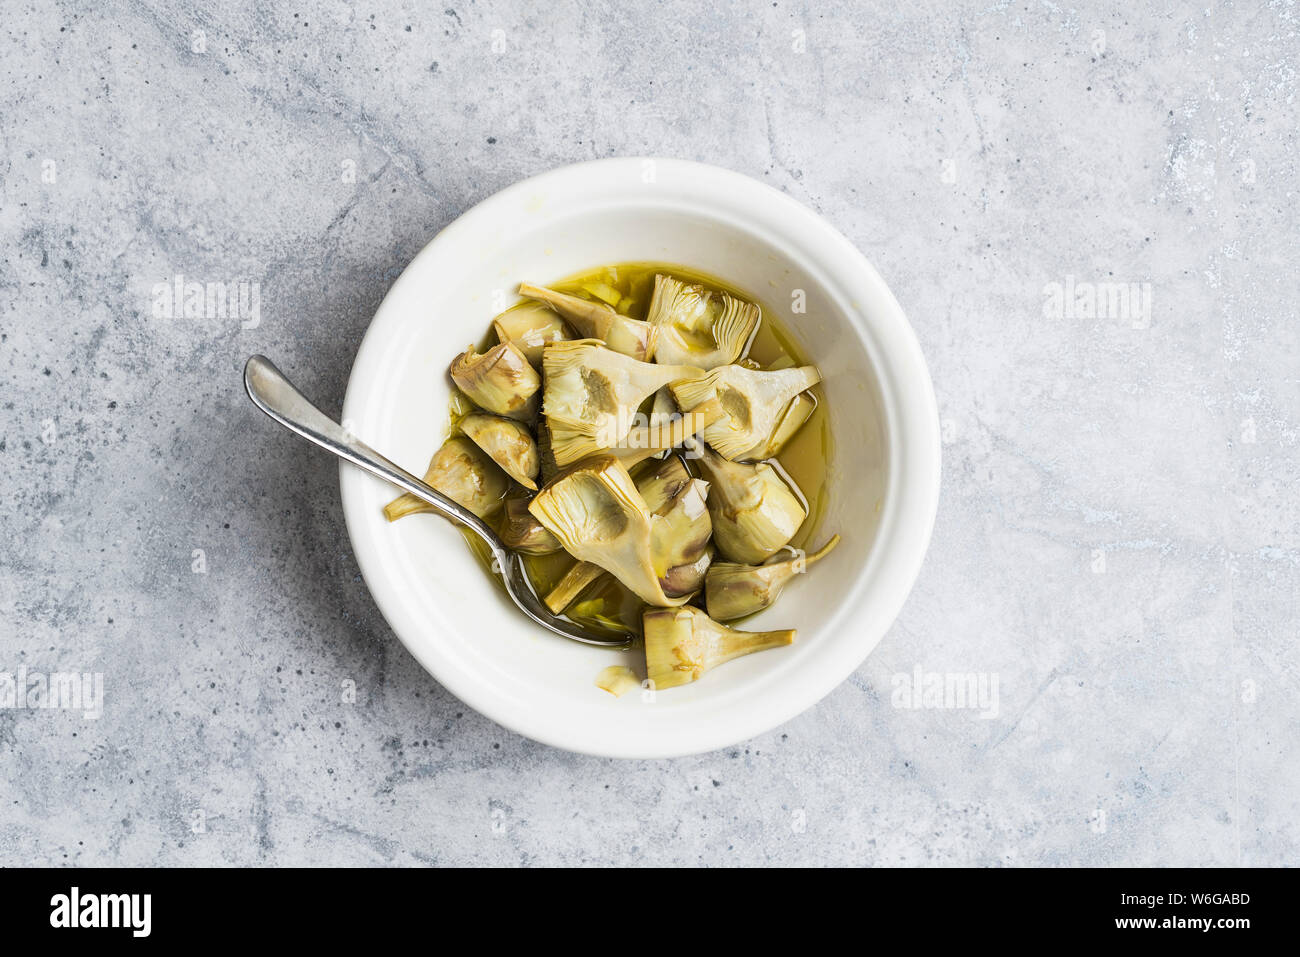 Bowl of cooked baby artichokes on a marble background Stock Photo